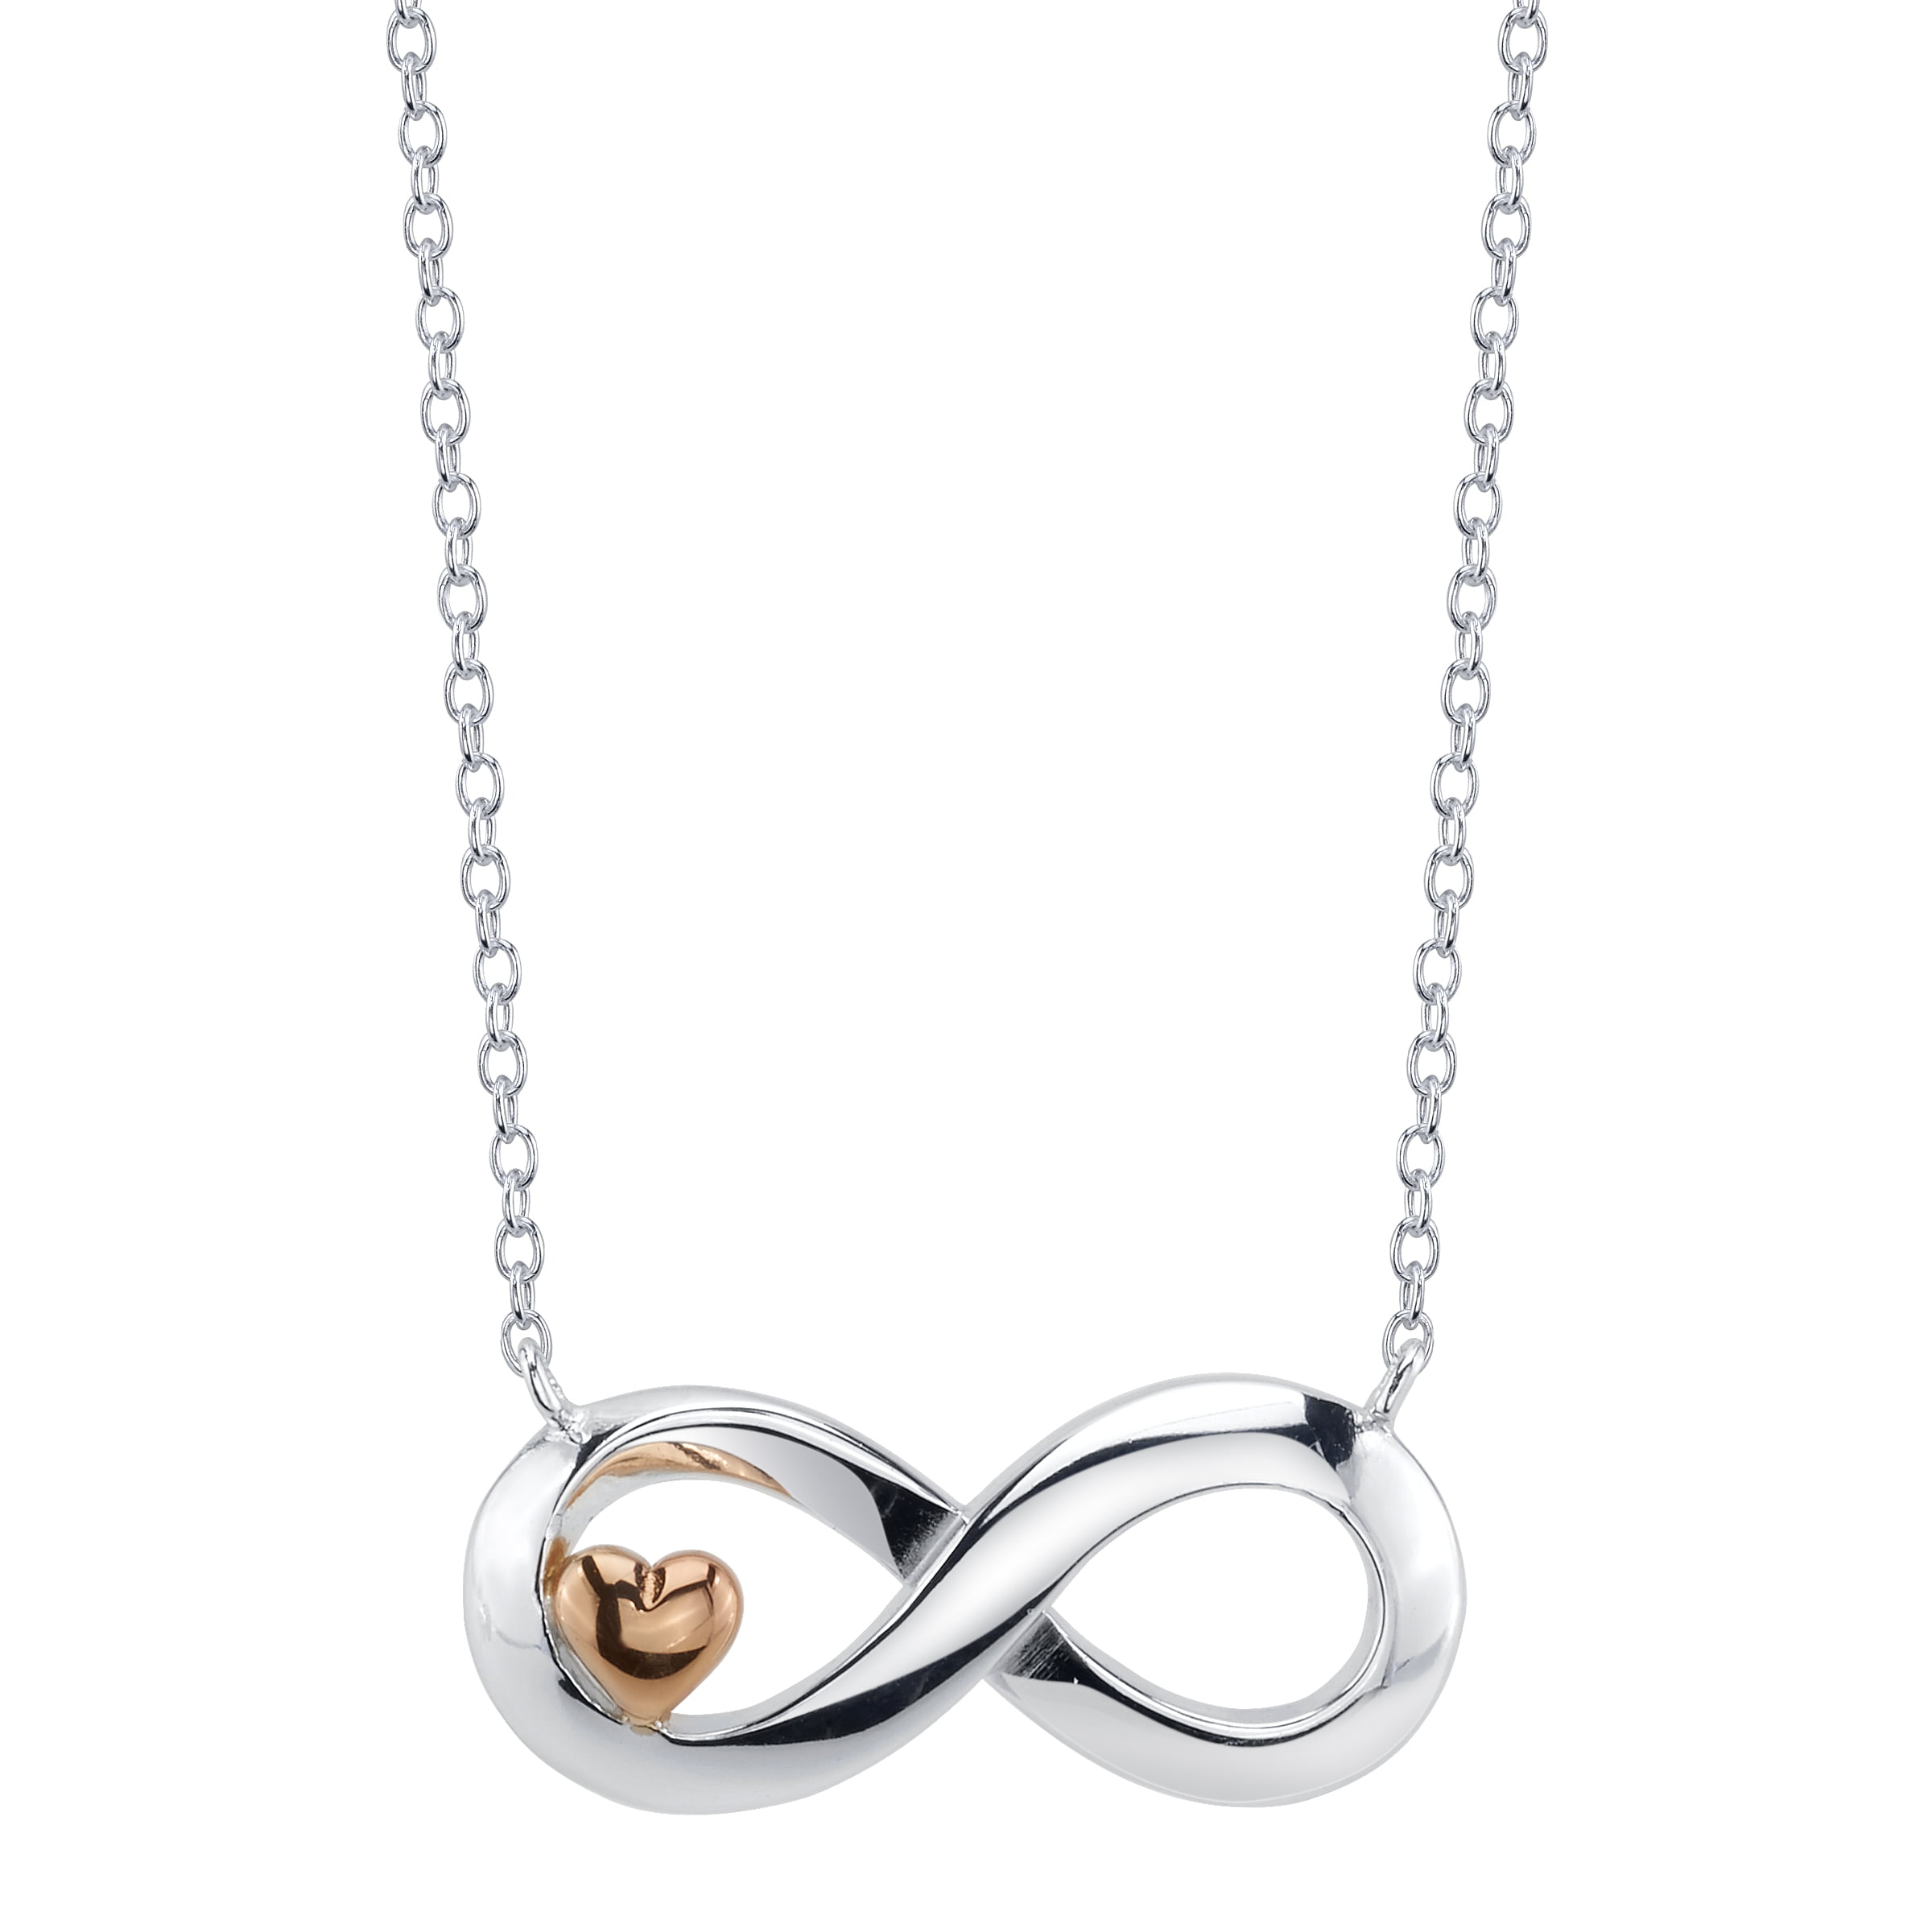 Designer Inspired 925 Sterling Silver Necklace w/ Double Heart INFINITY Pendant